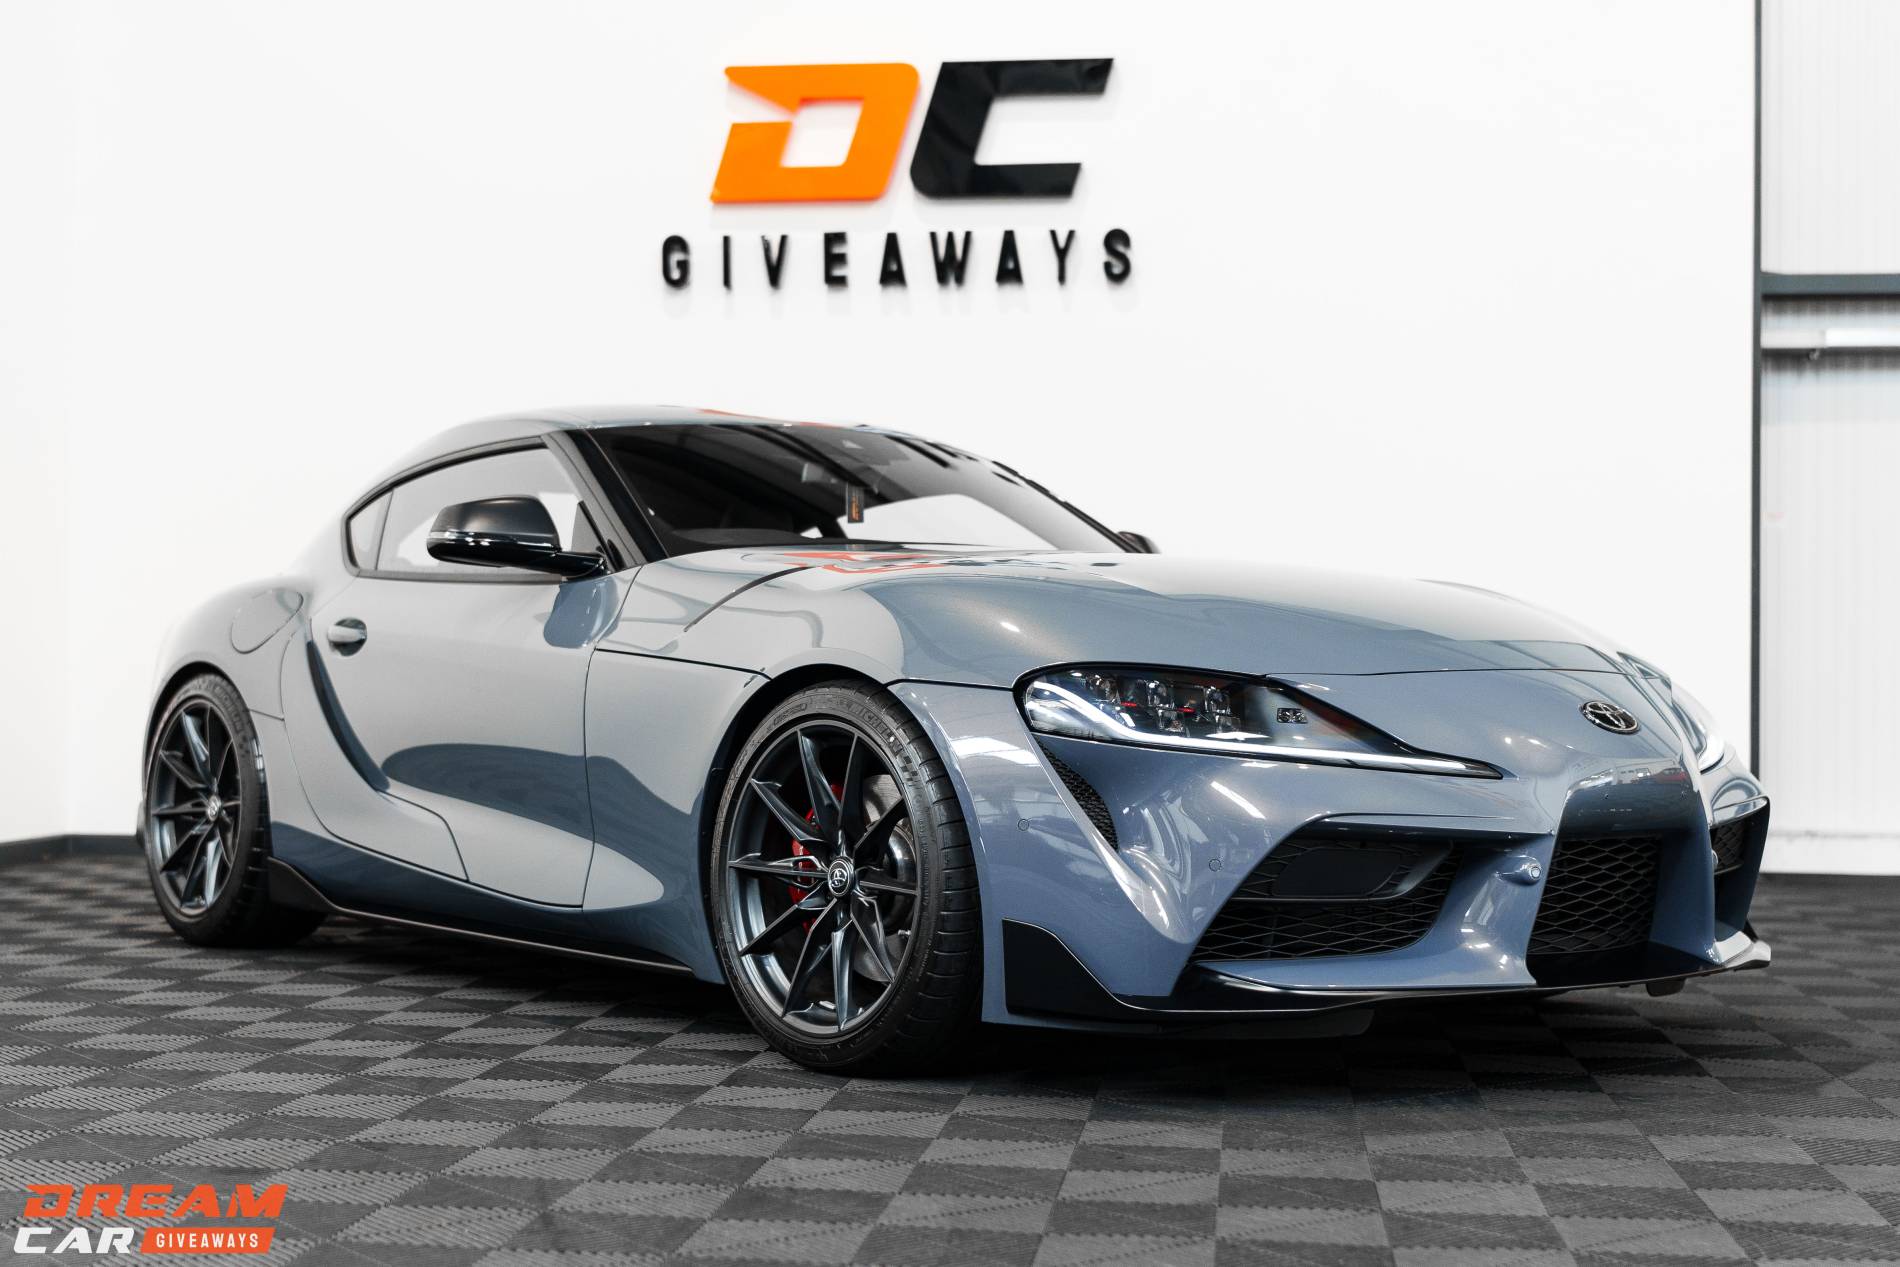 Win this 2023 Toyota Supra GR & £1,000 or £38,000 Tax Free